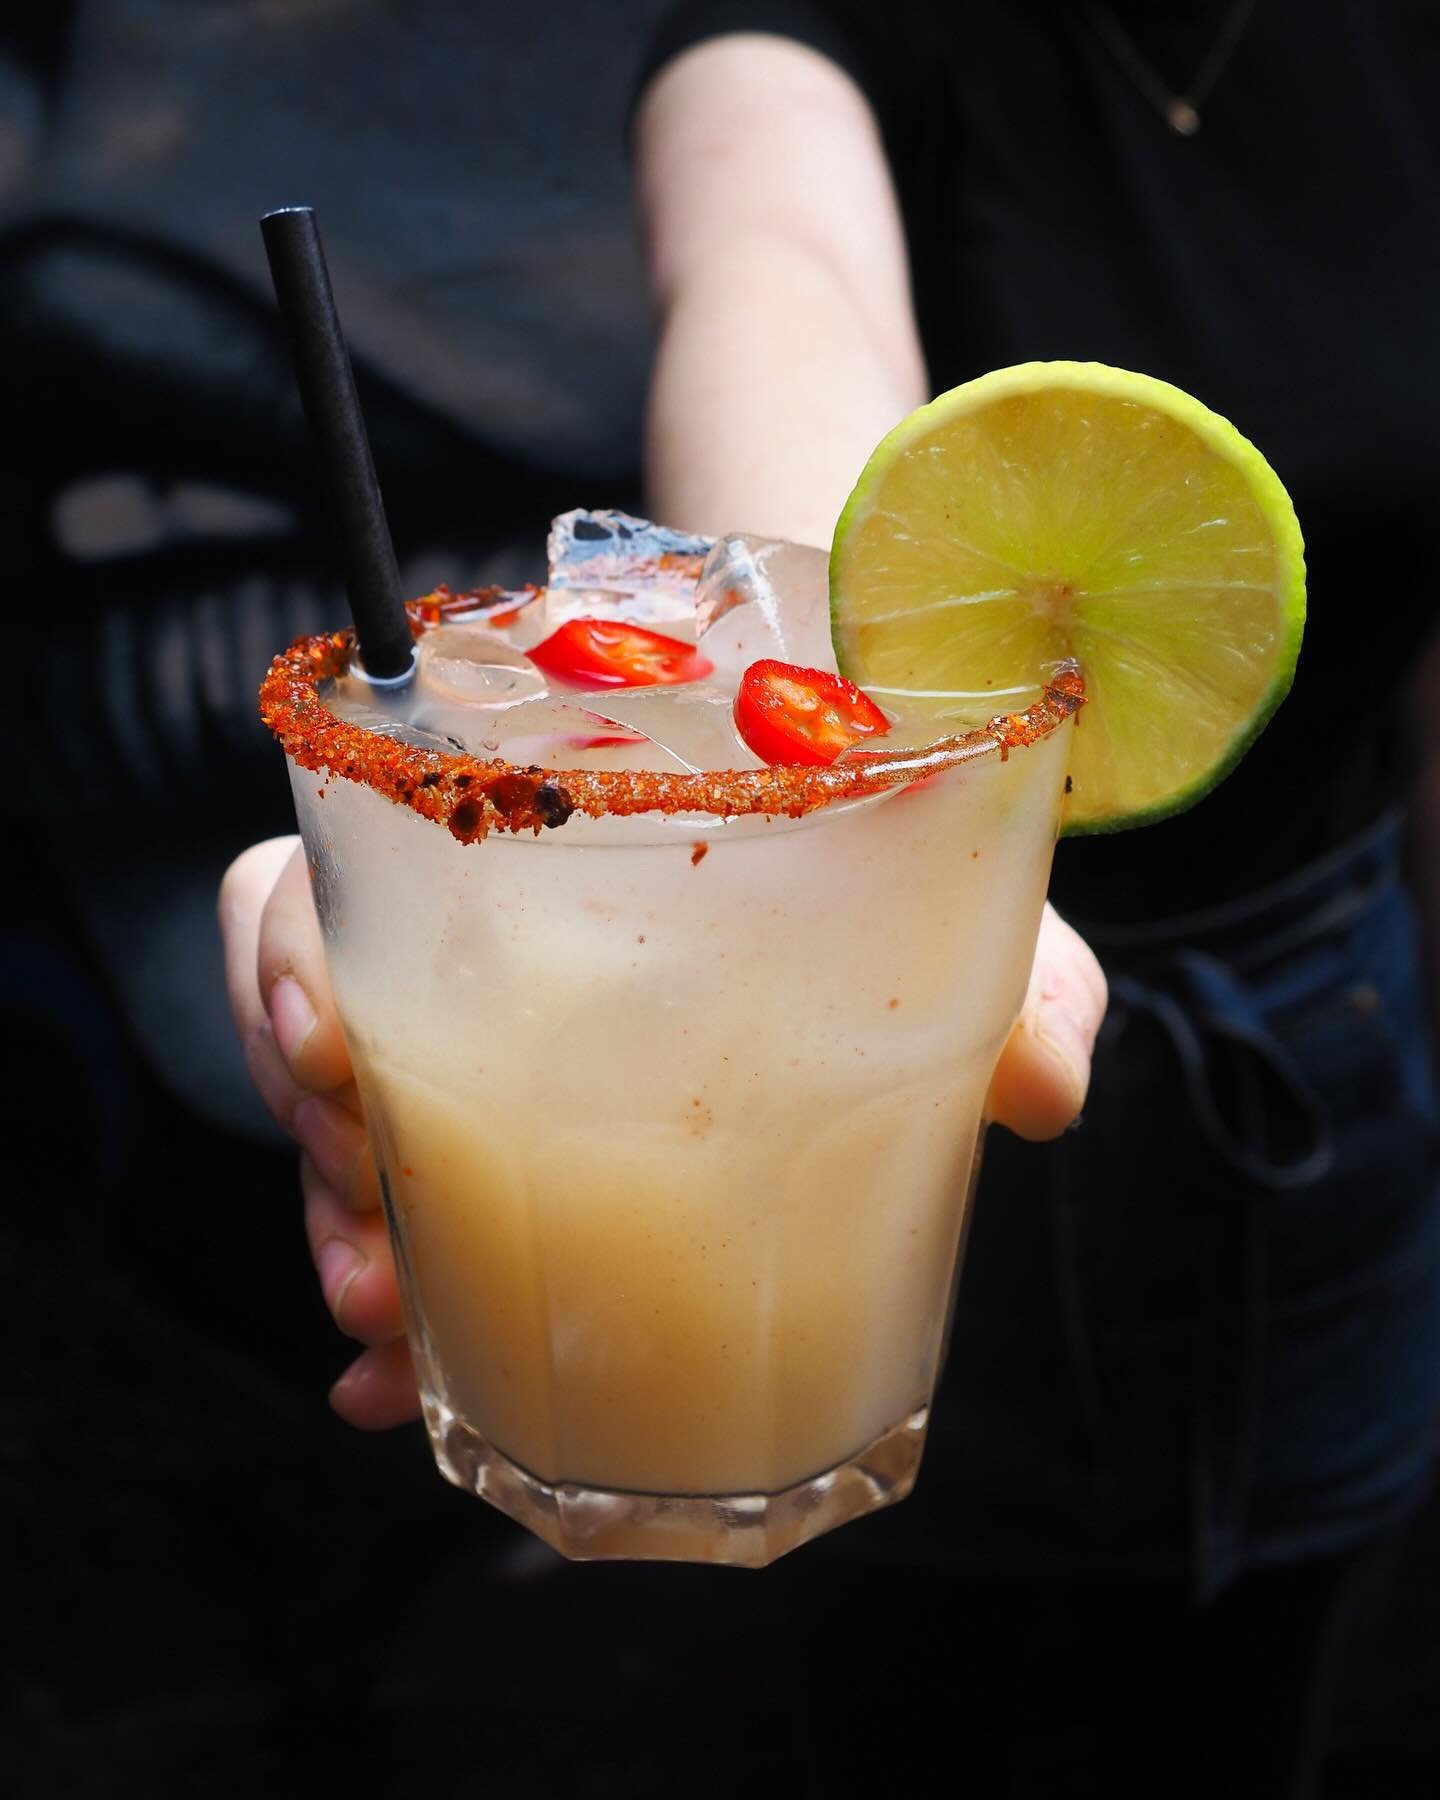 HOT HONEY PEACH MARGARITA 🌶️🍯🍑 Basically a spicy marg but with a twist of honey and peach. 

The perfect cinco de mayo (and boozy brunch) cocktail!